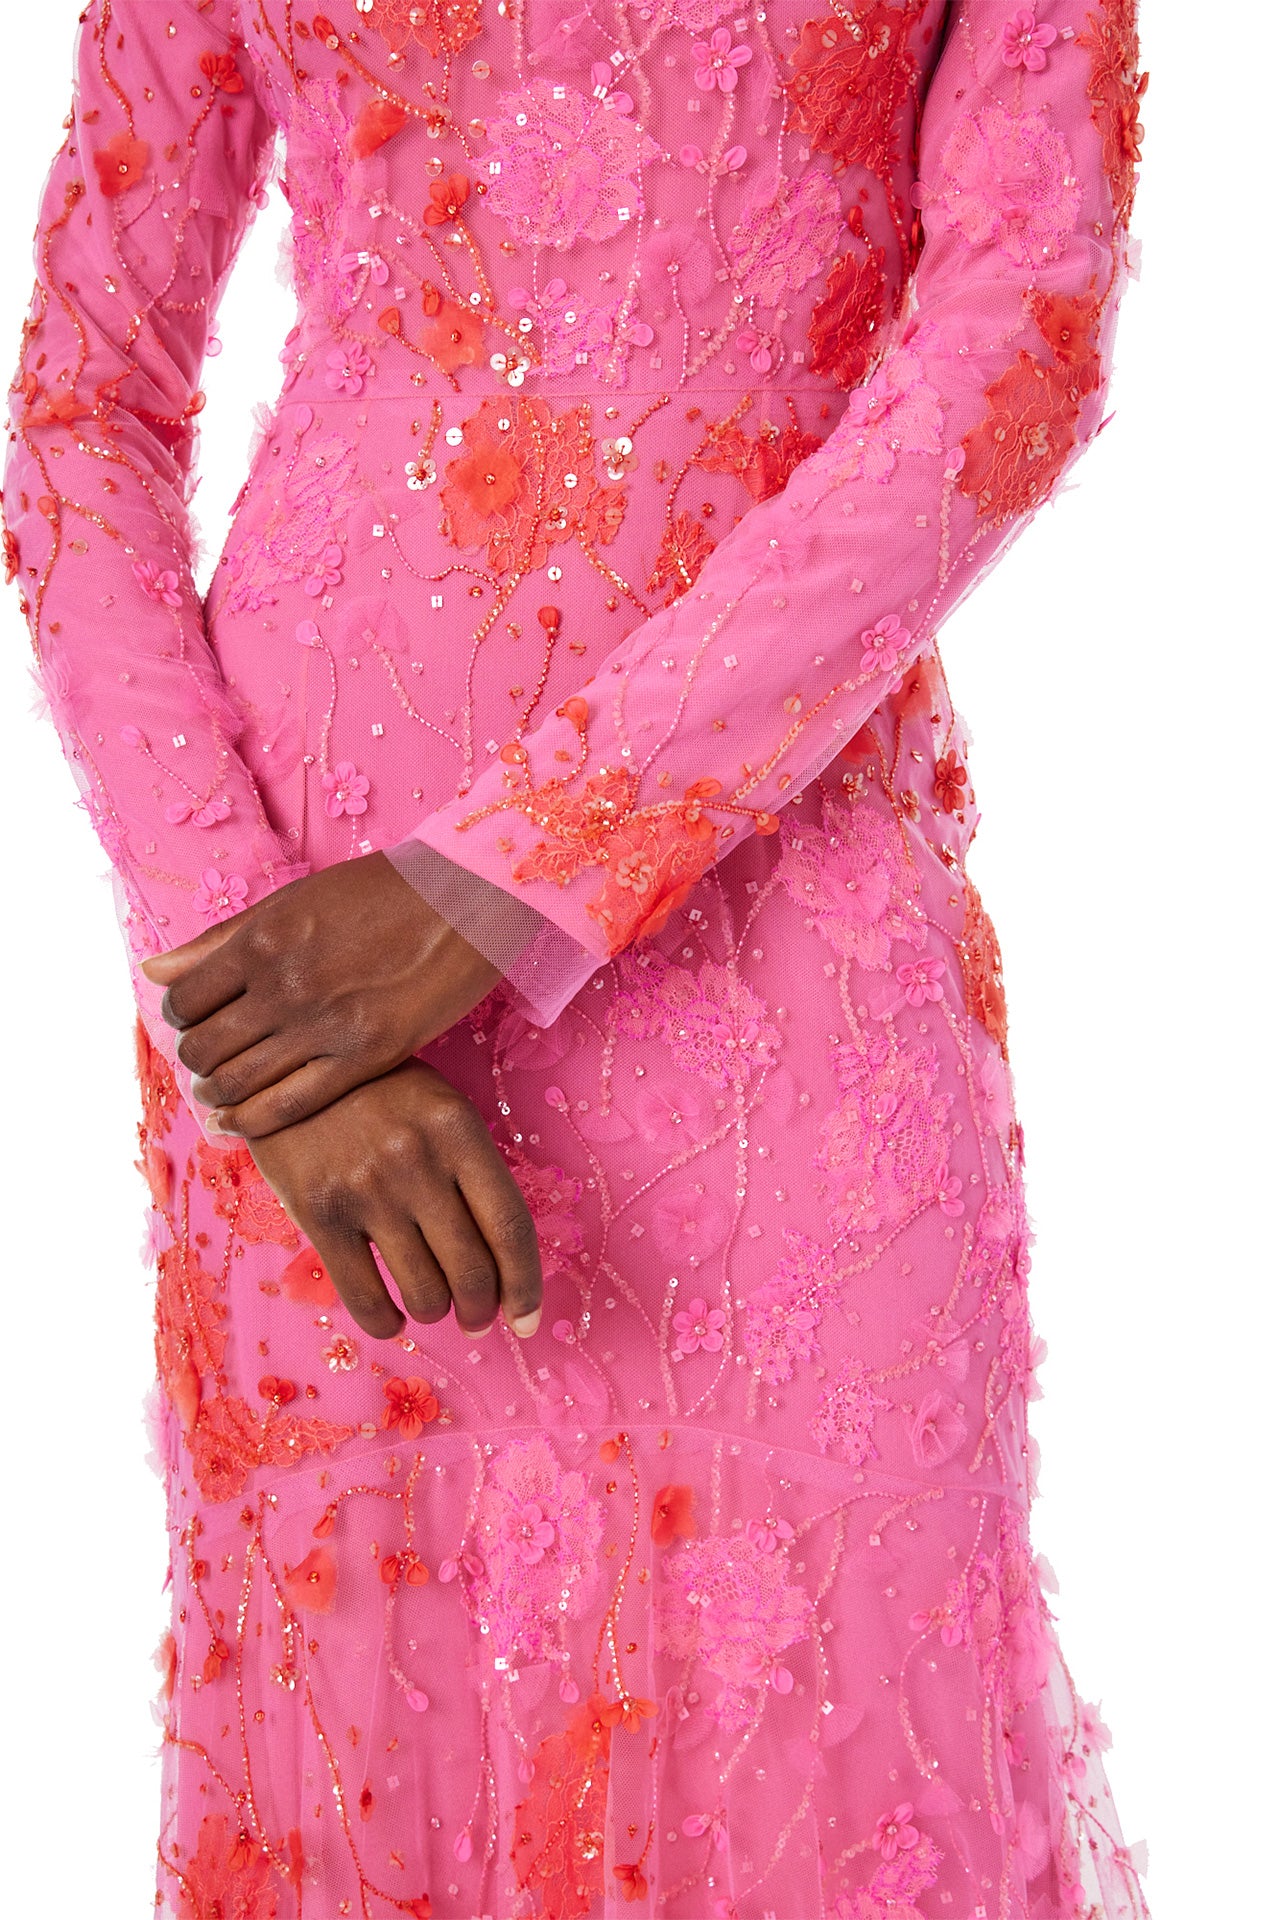 Monique Lhuillier Spring 2024 long sleeve gown in raspberry red embroidery - sleeve detail.